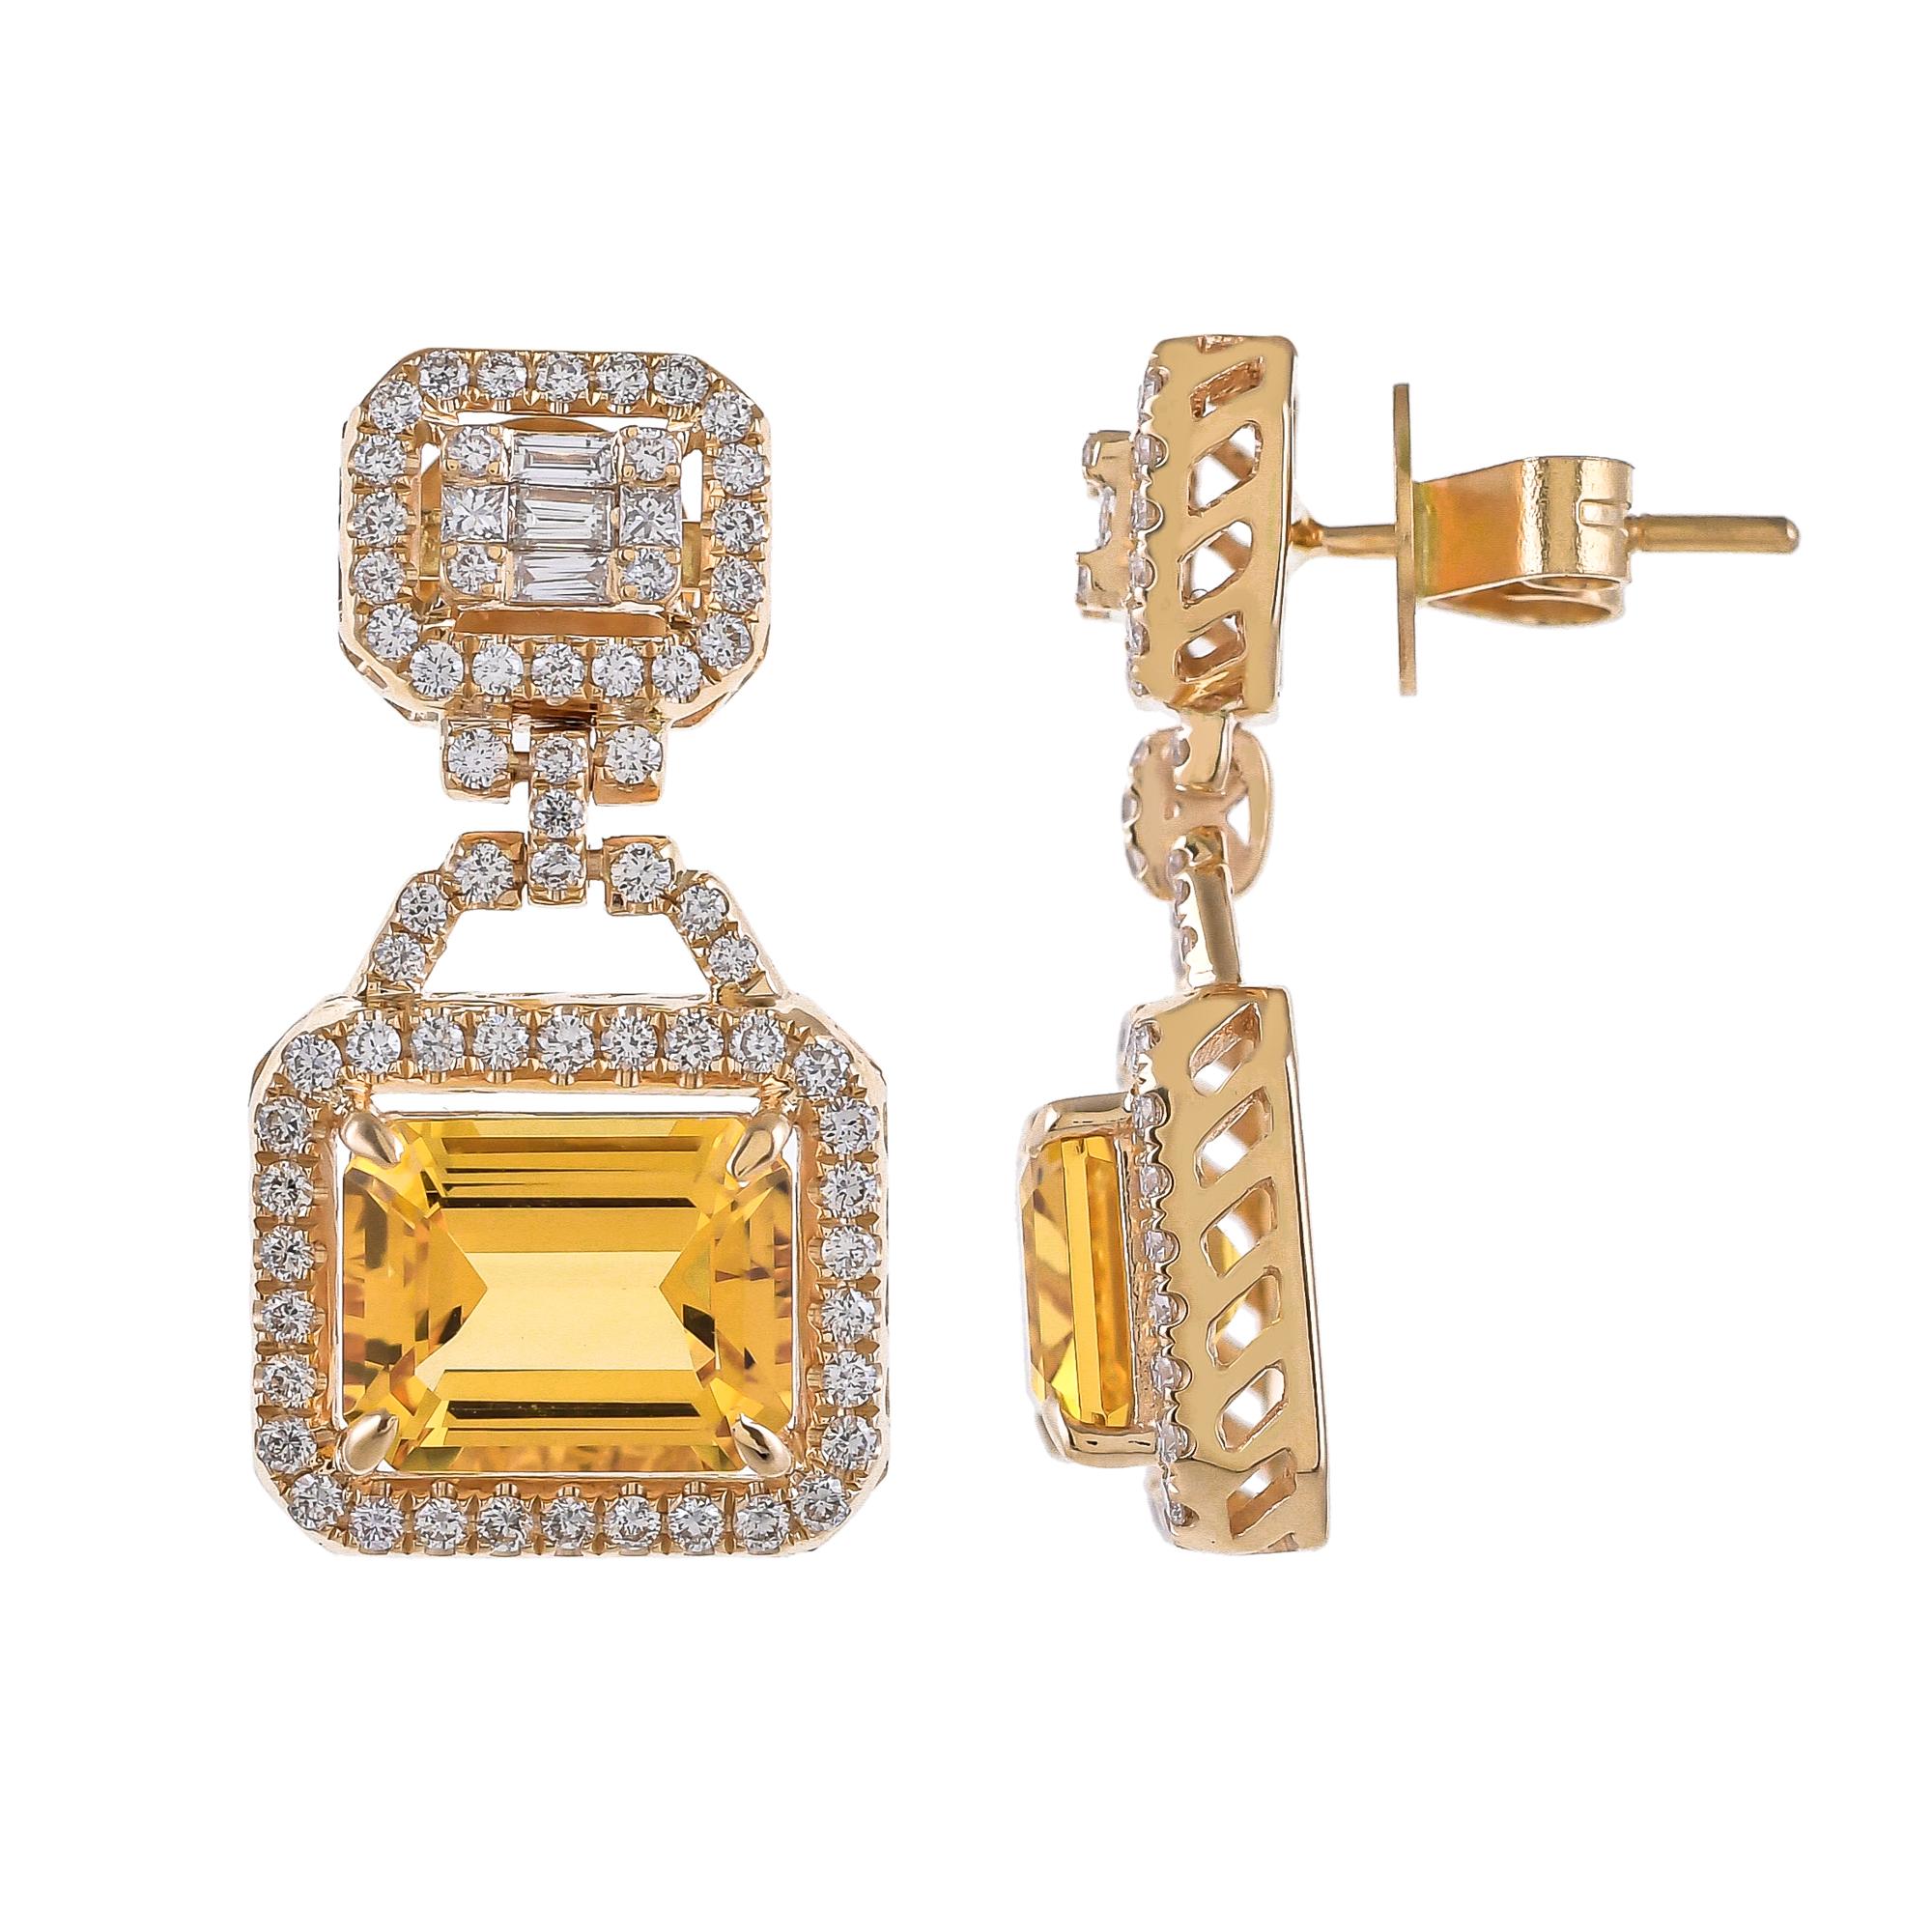 The earring comprises of a step cut octagon-shaped honey quartz weighing approximately 6.01 carats as the centre stone with a diamond set surround suspended from baguettes and full-cut diamonds set surmount with a total diamond weight of 1.22